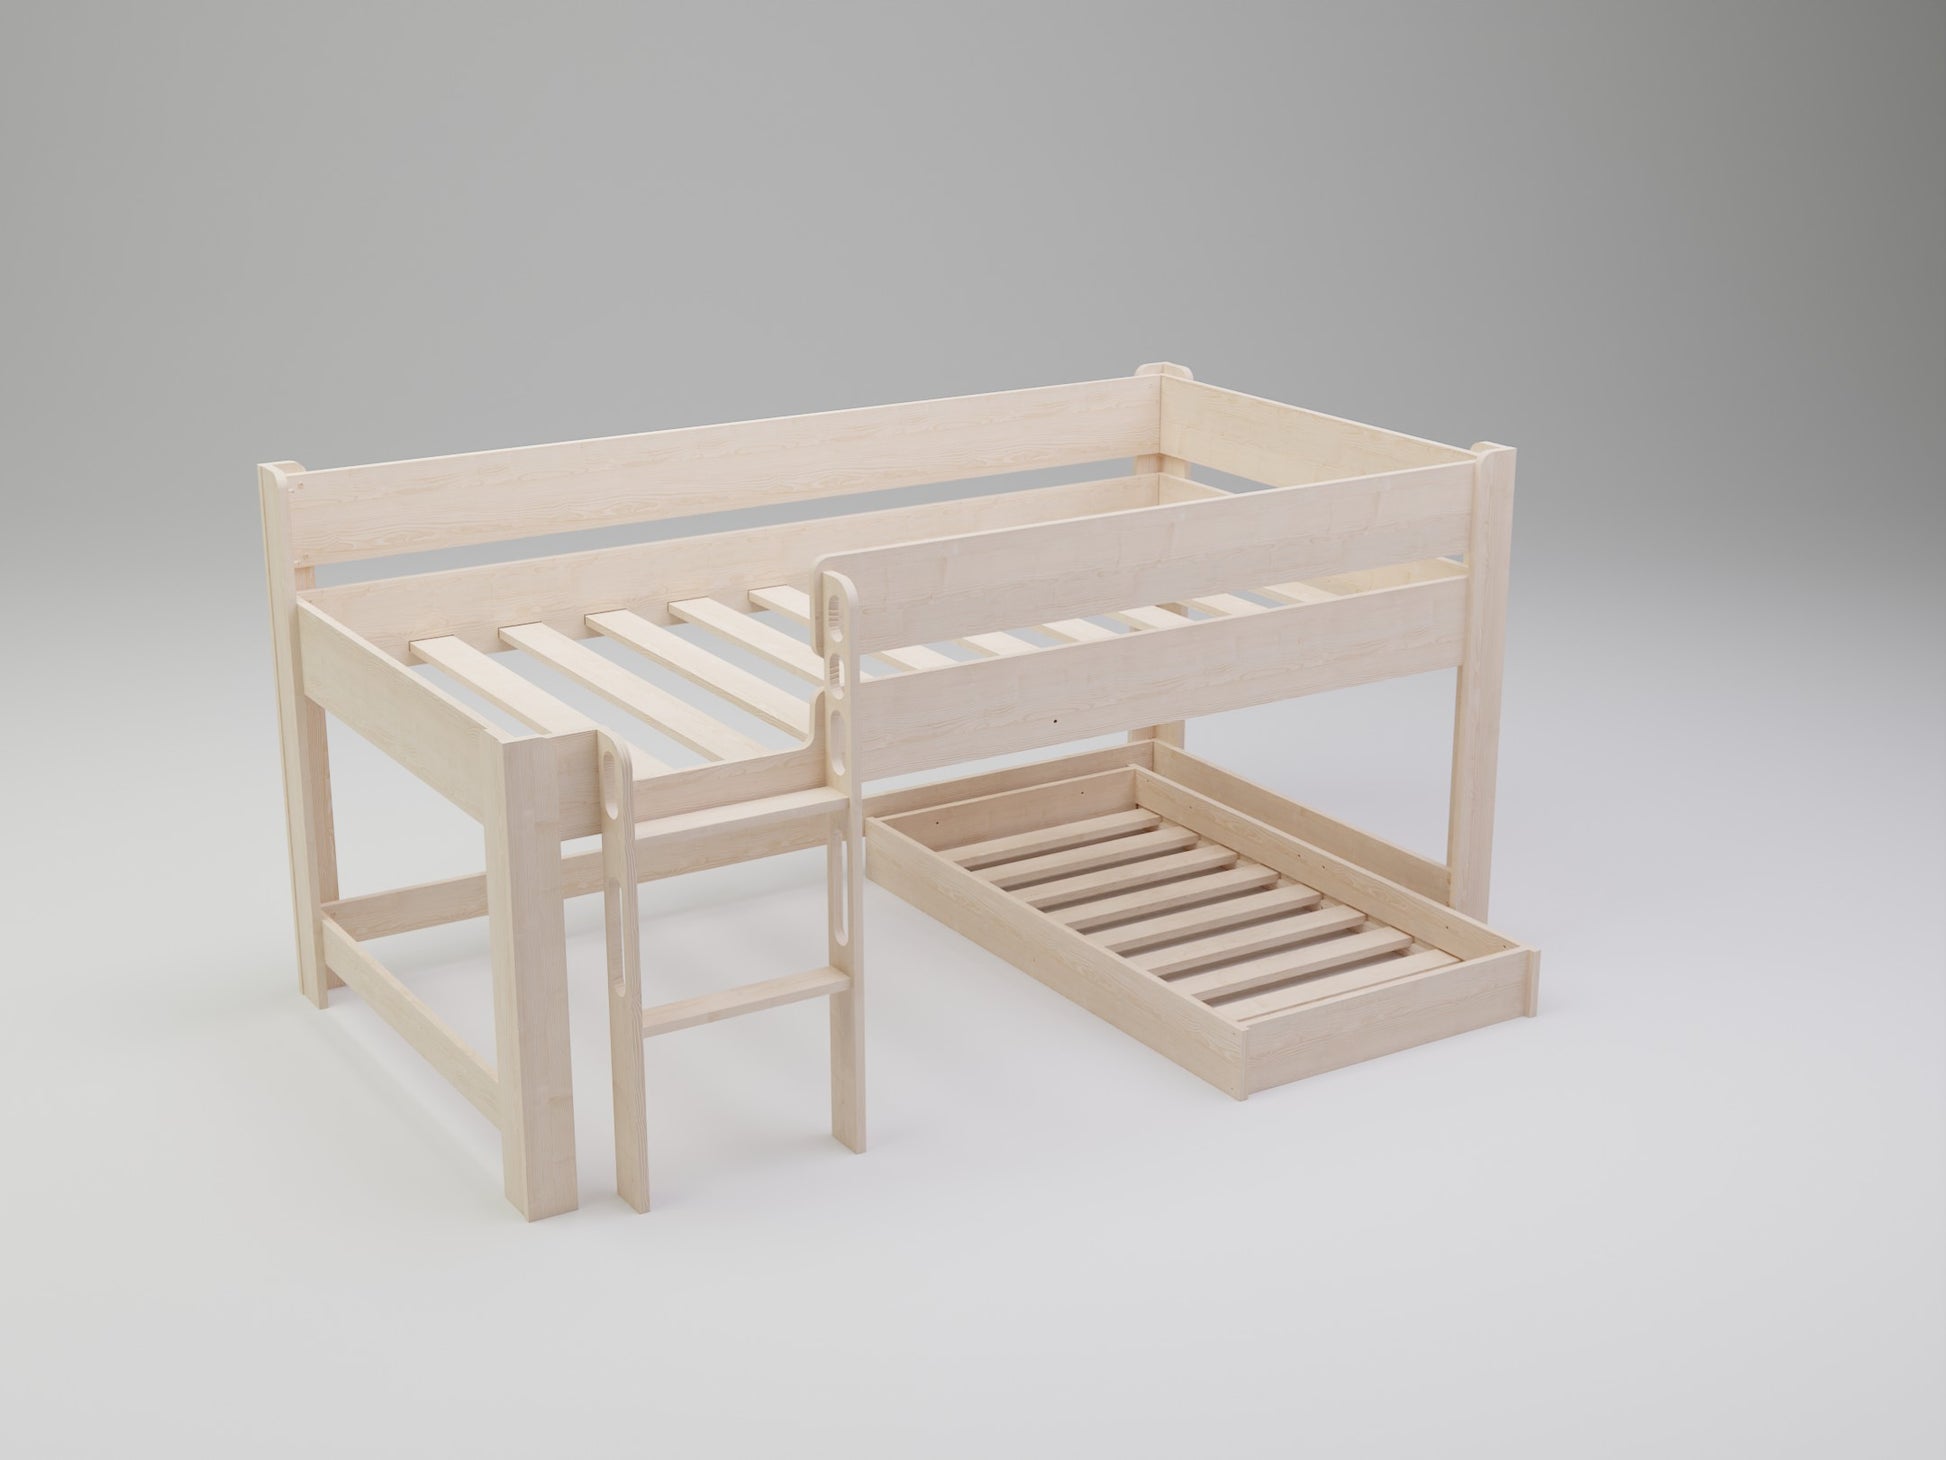 Cot size to super king: Discover customizable size options in our wooden kids L shaped loft bed collection.